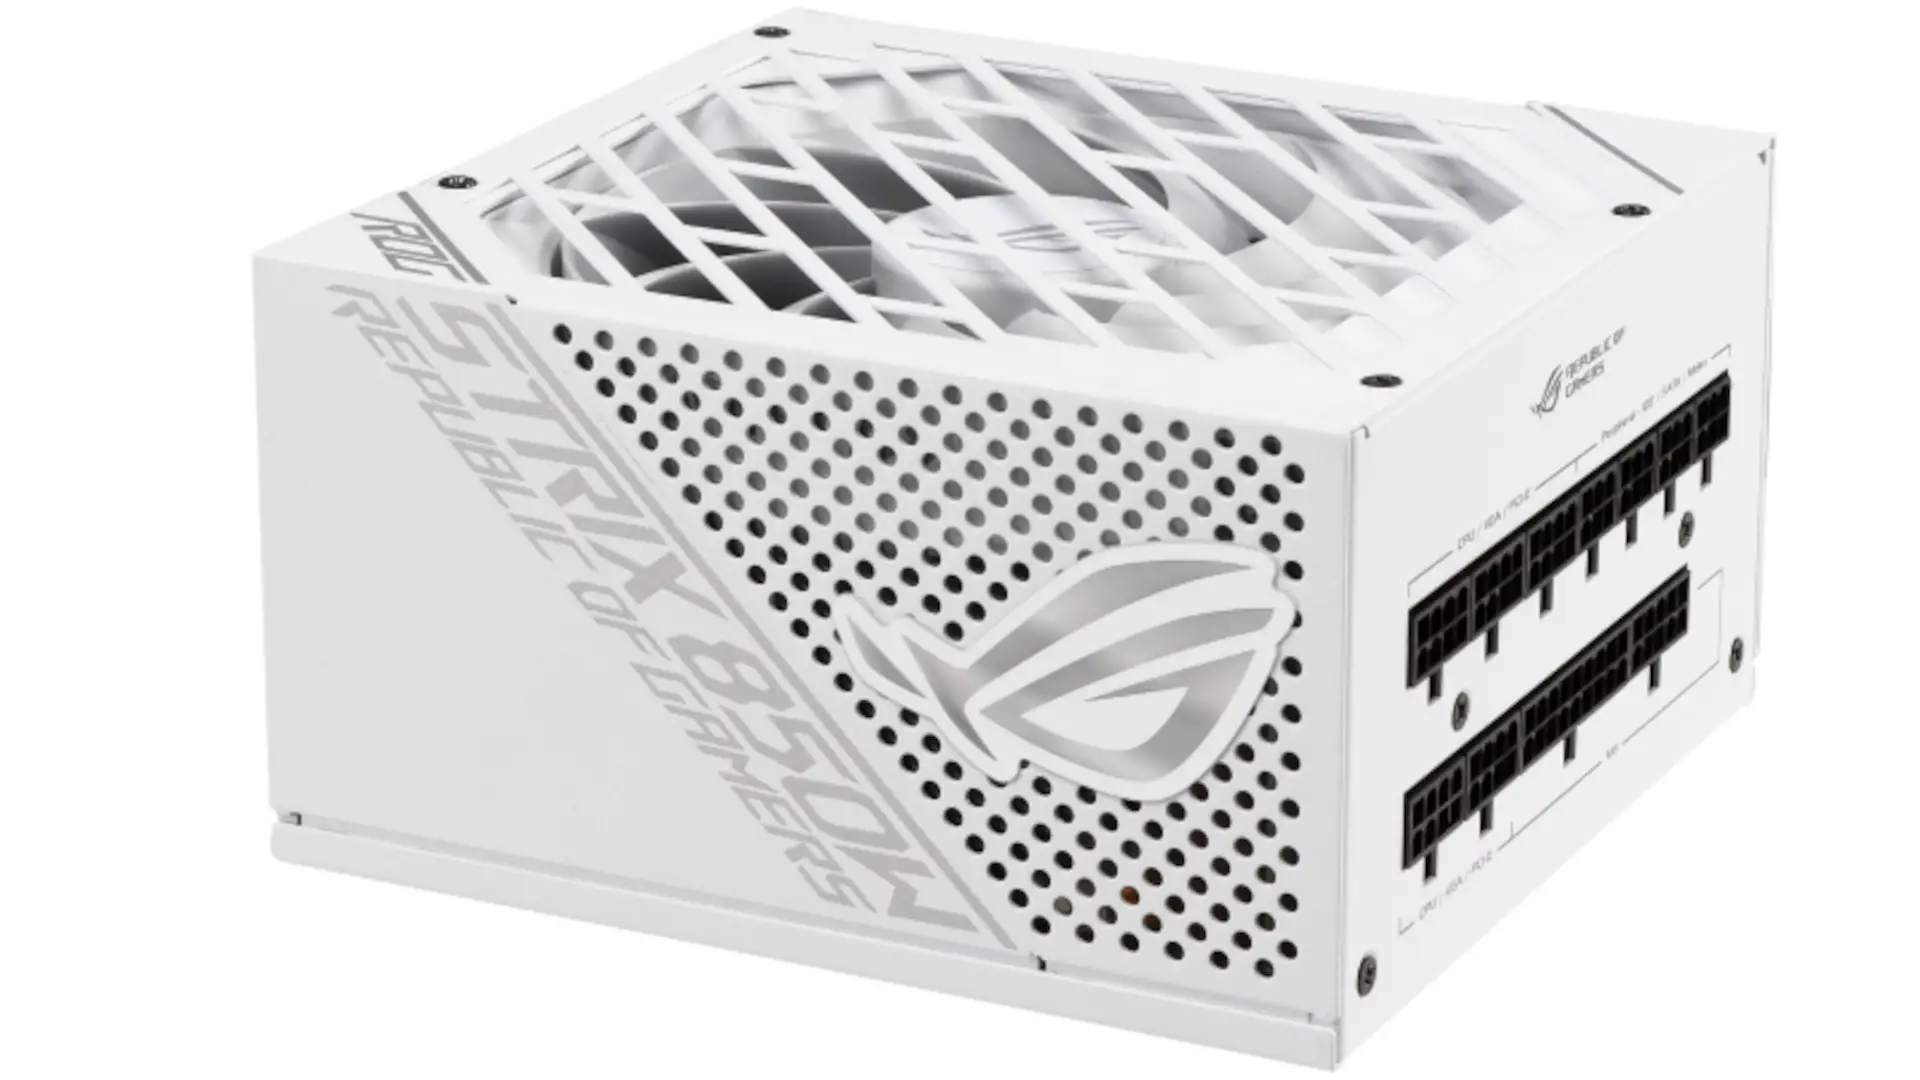 You are currently viewing ROG STRIX 850W Gold White Edition (16-pin cable) Power Supply Review